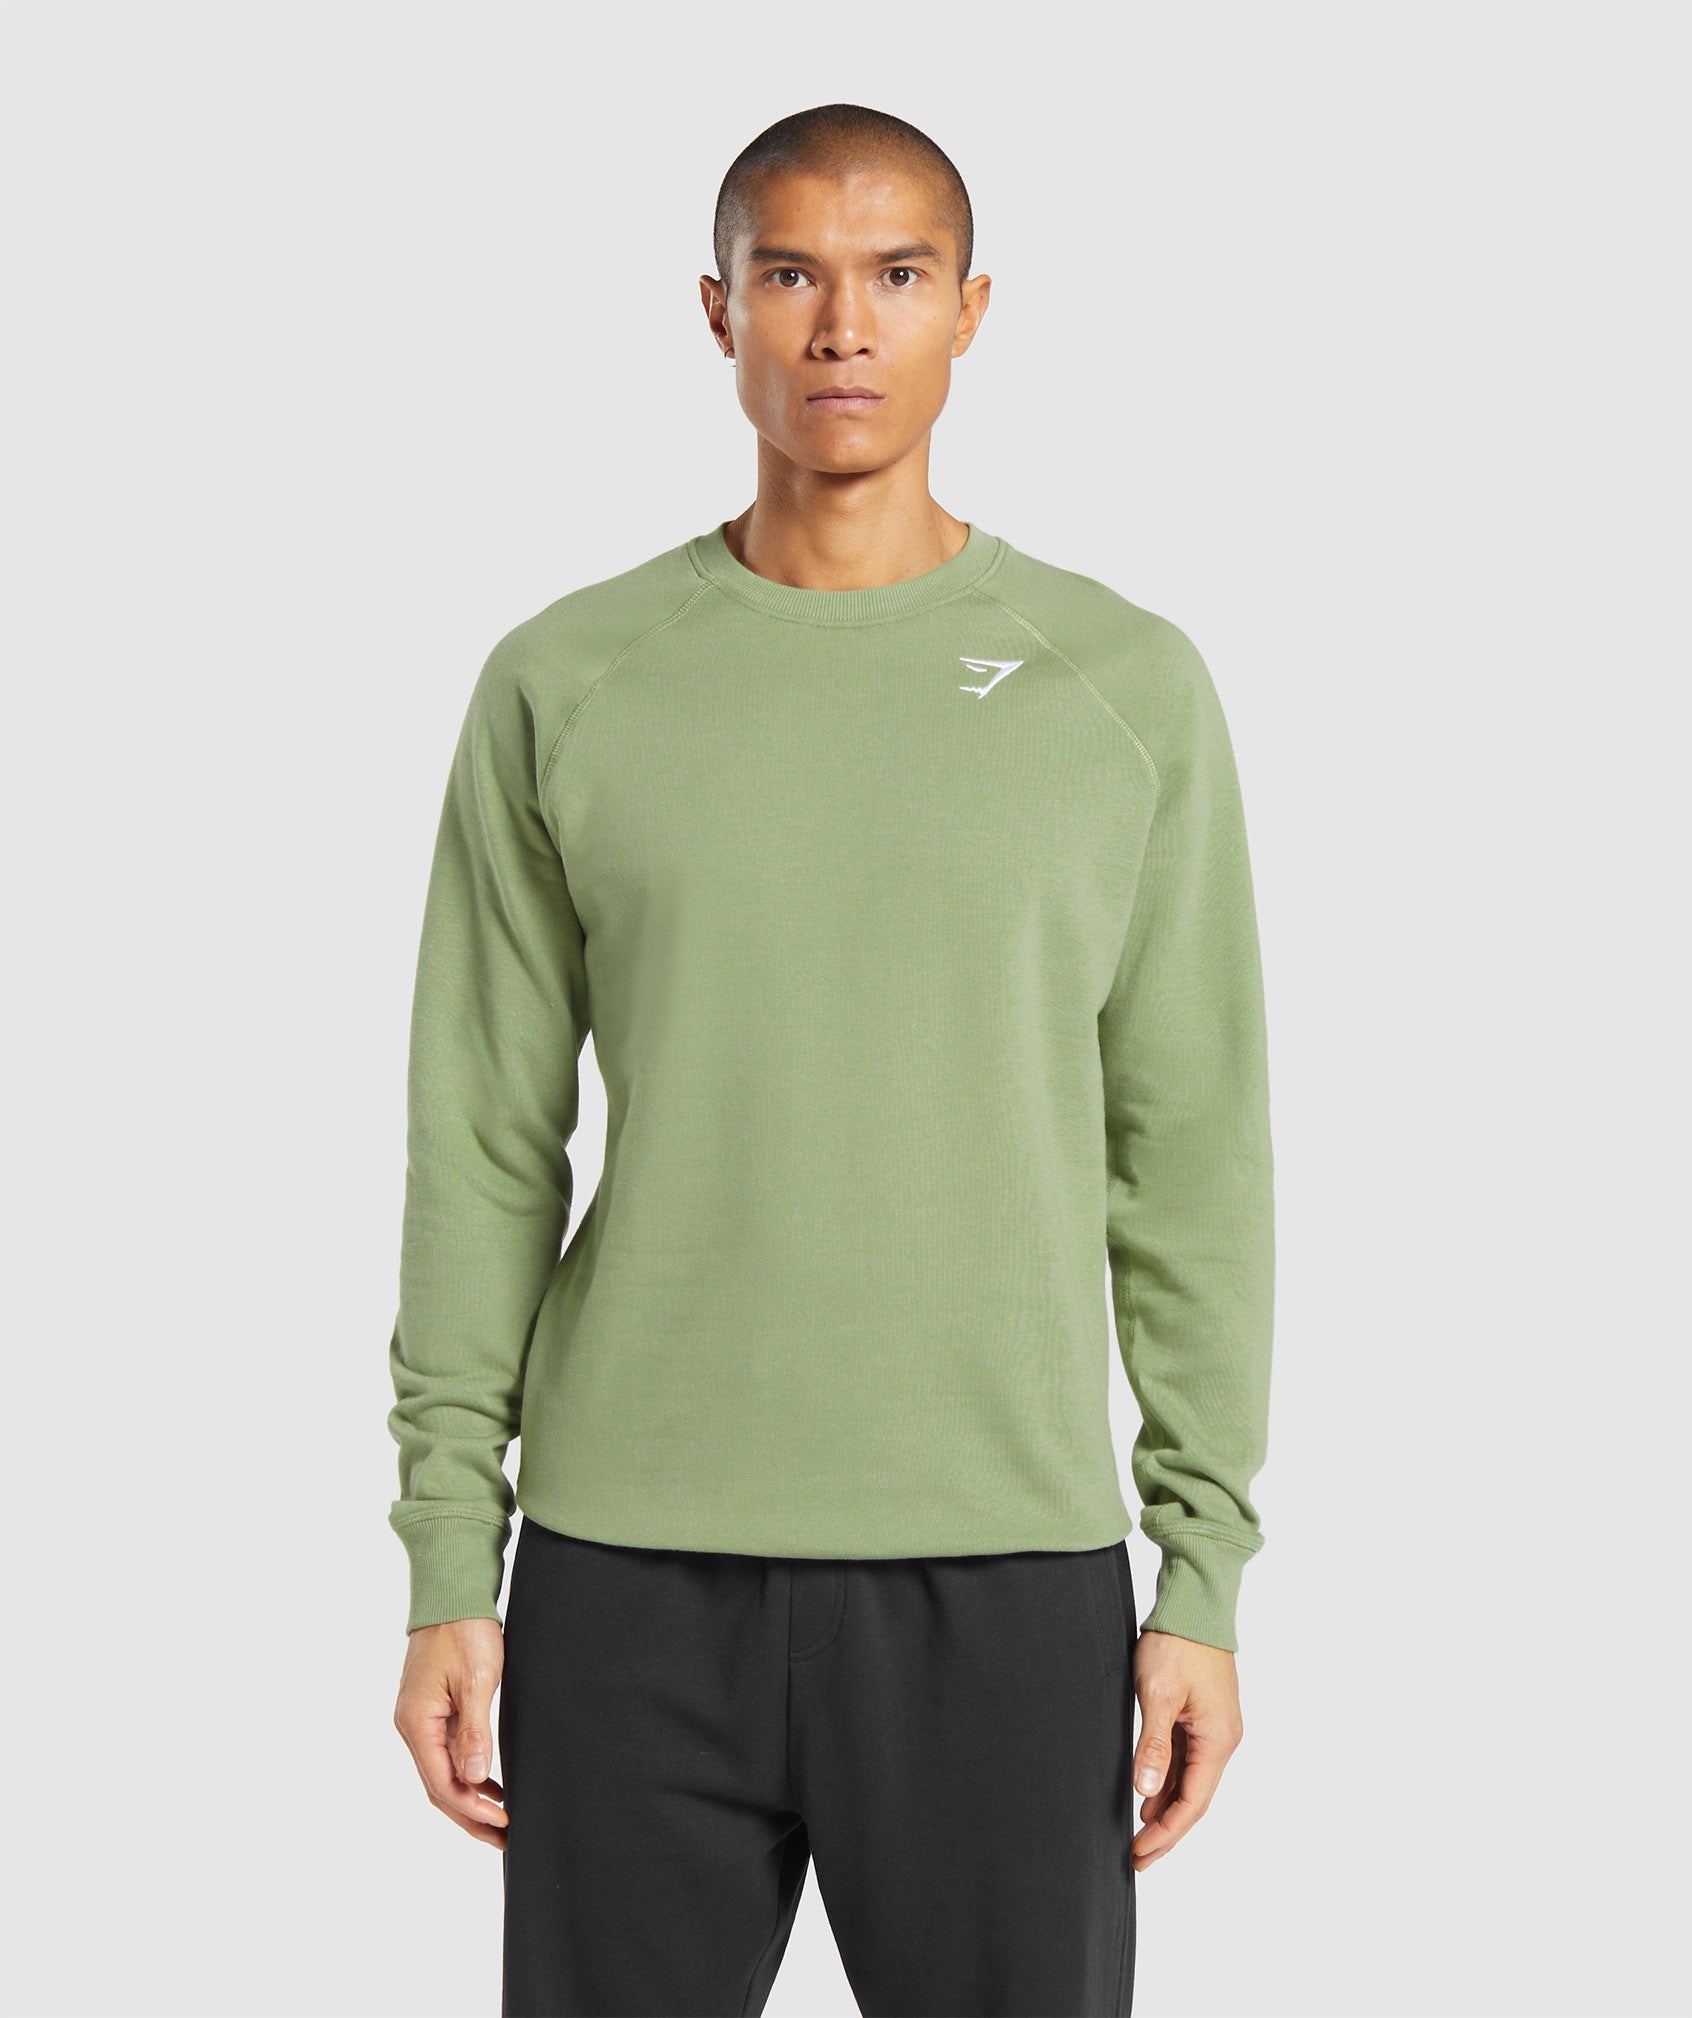 Crest Sweatshirt in Natural Sage Green is out of stock